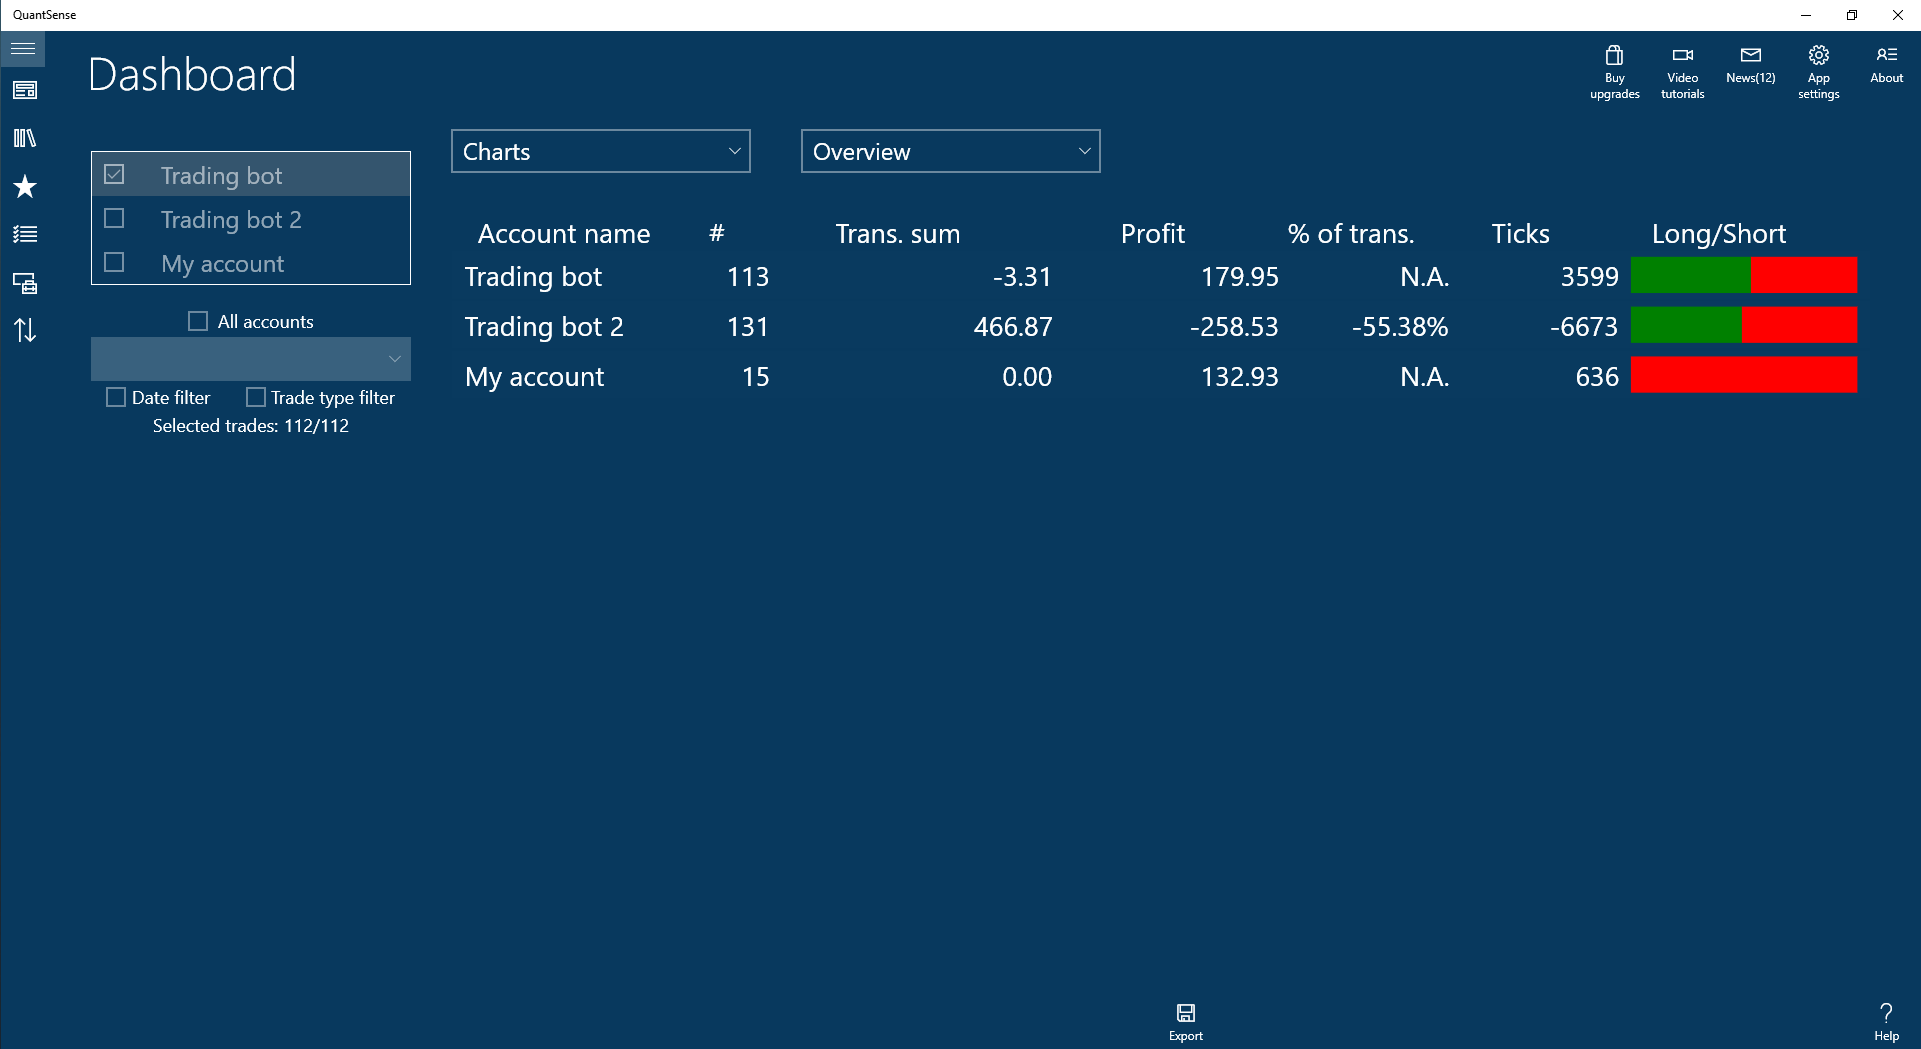 Dashboard showing the accounts overview.